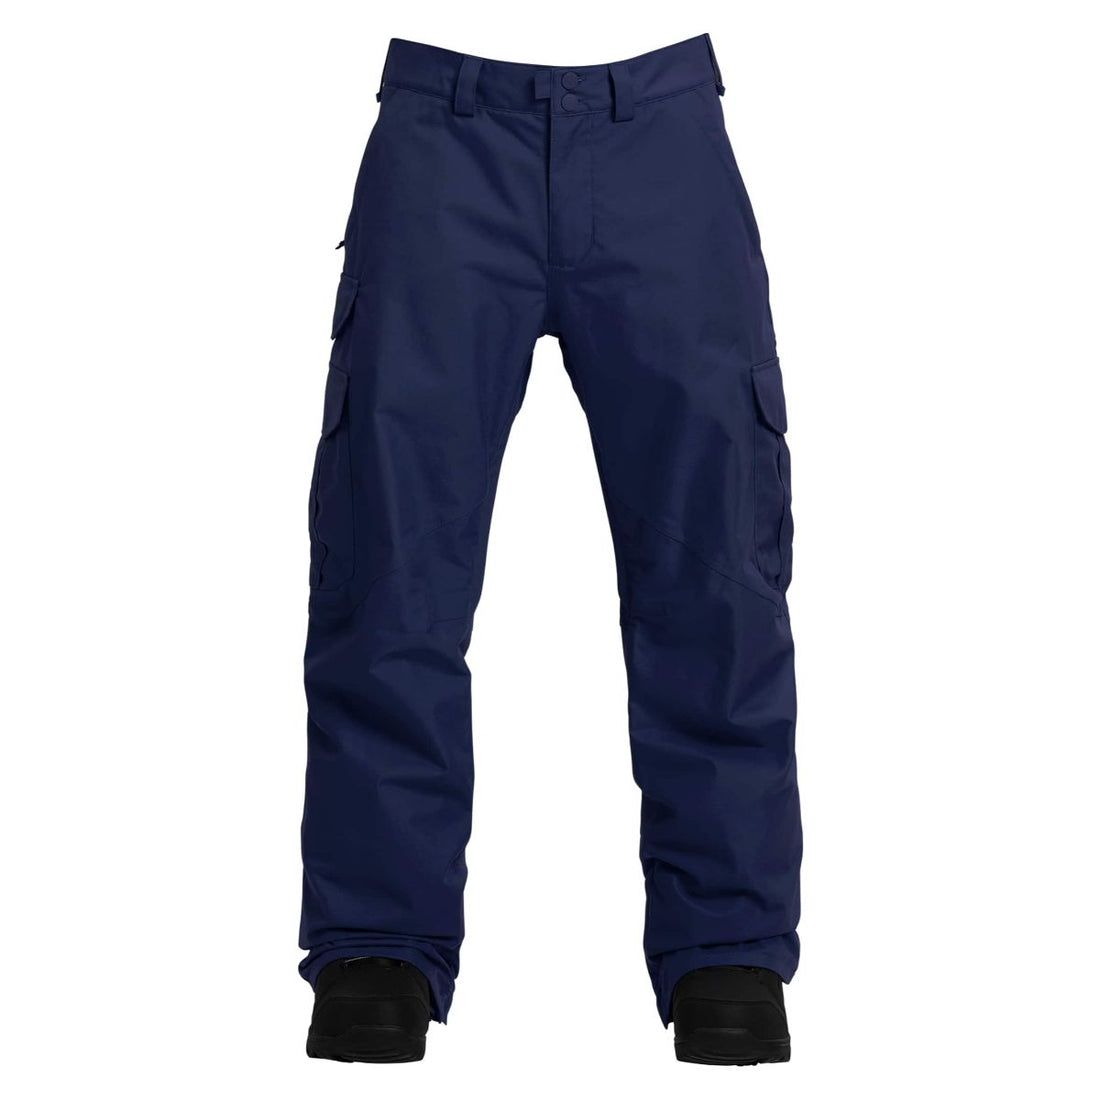 Burton Men's Cargo Pant - Relaxed Fit